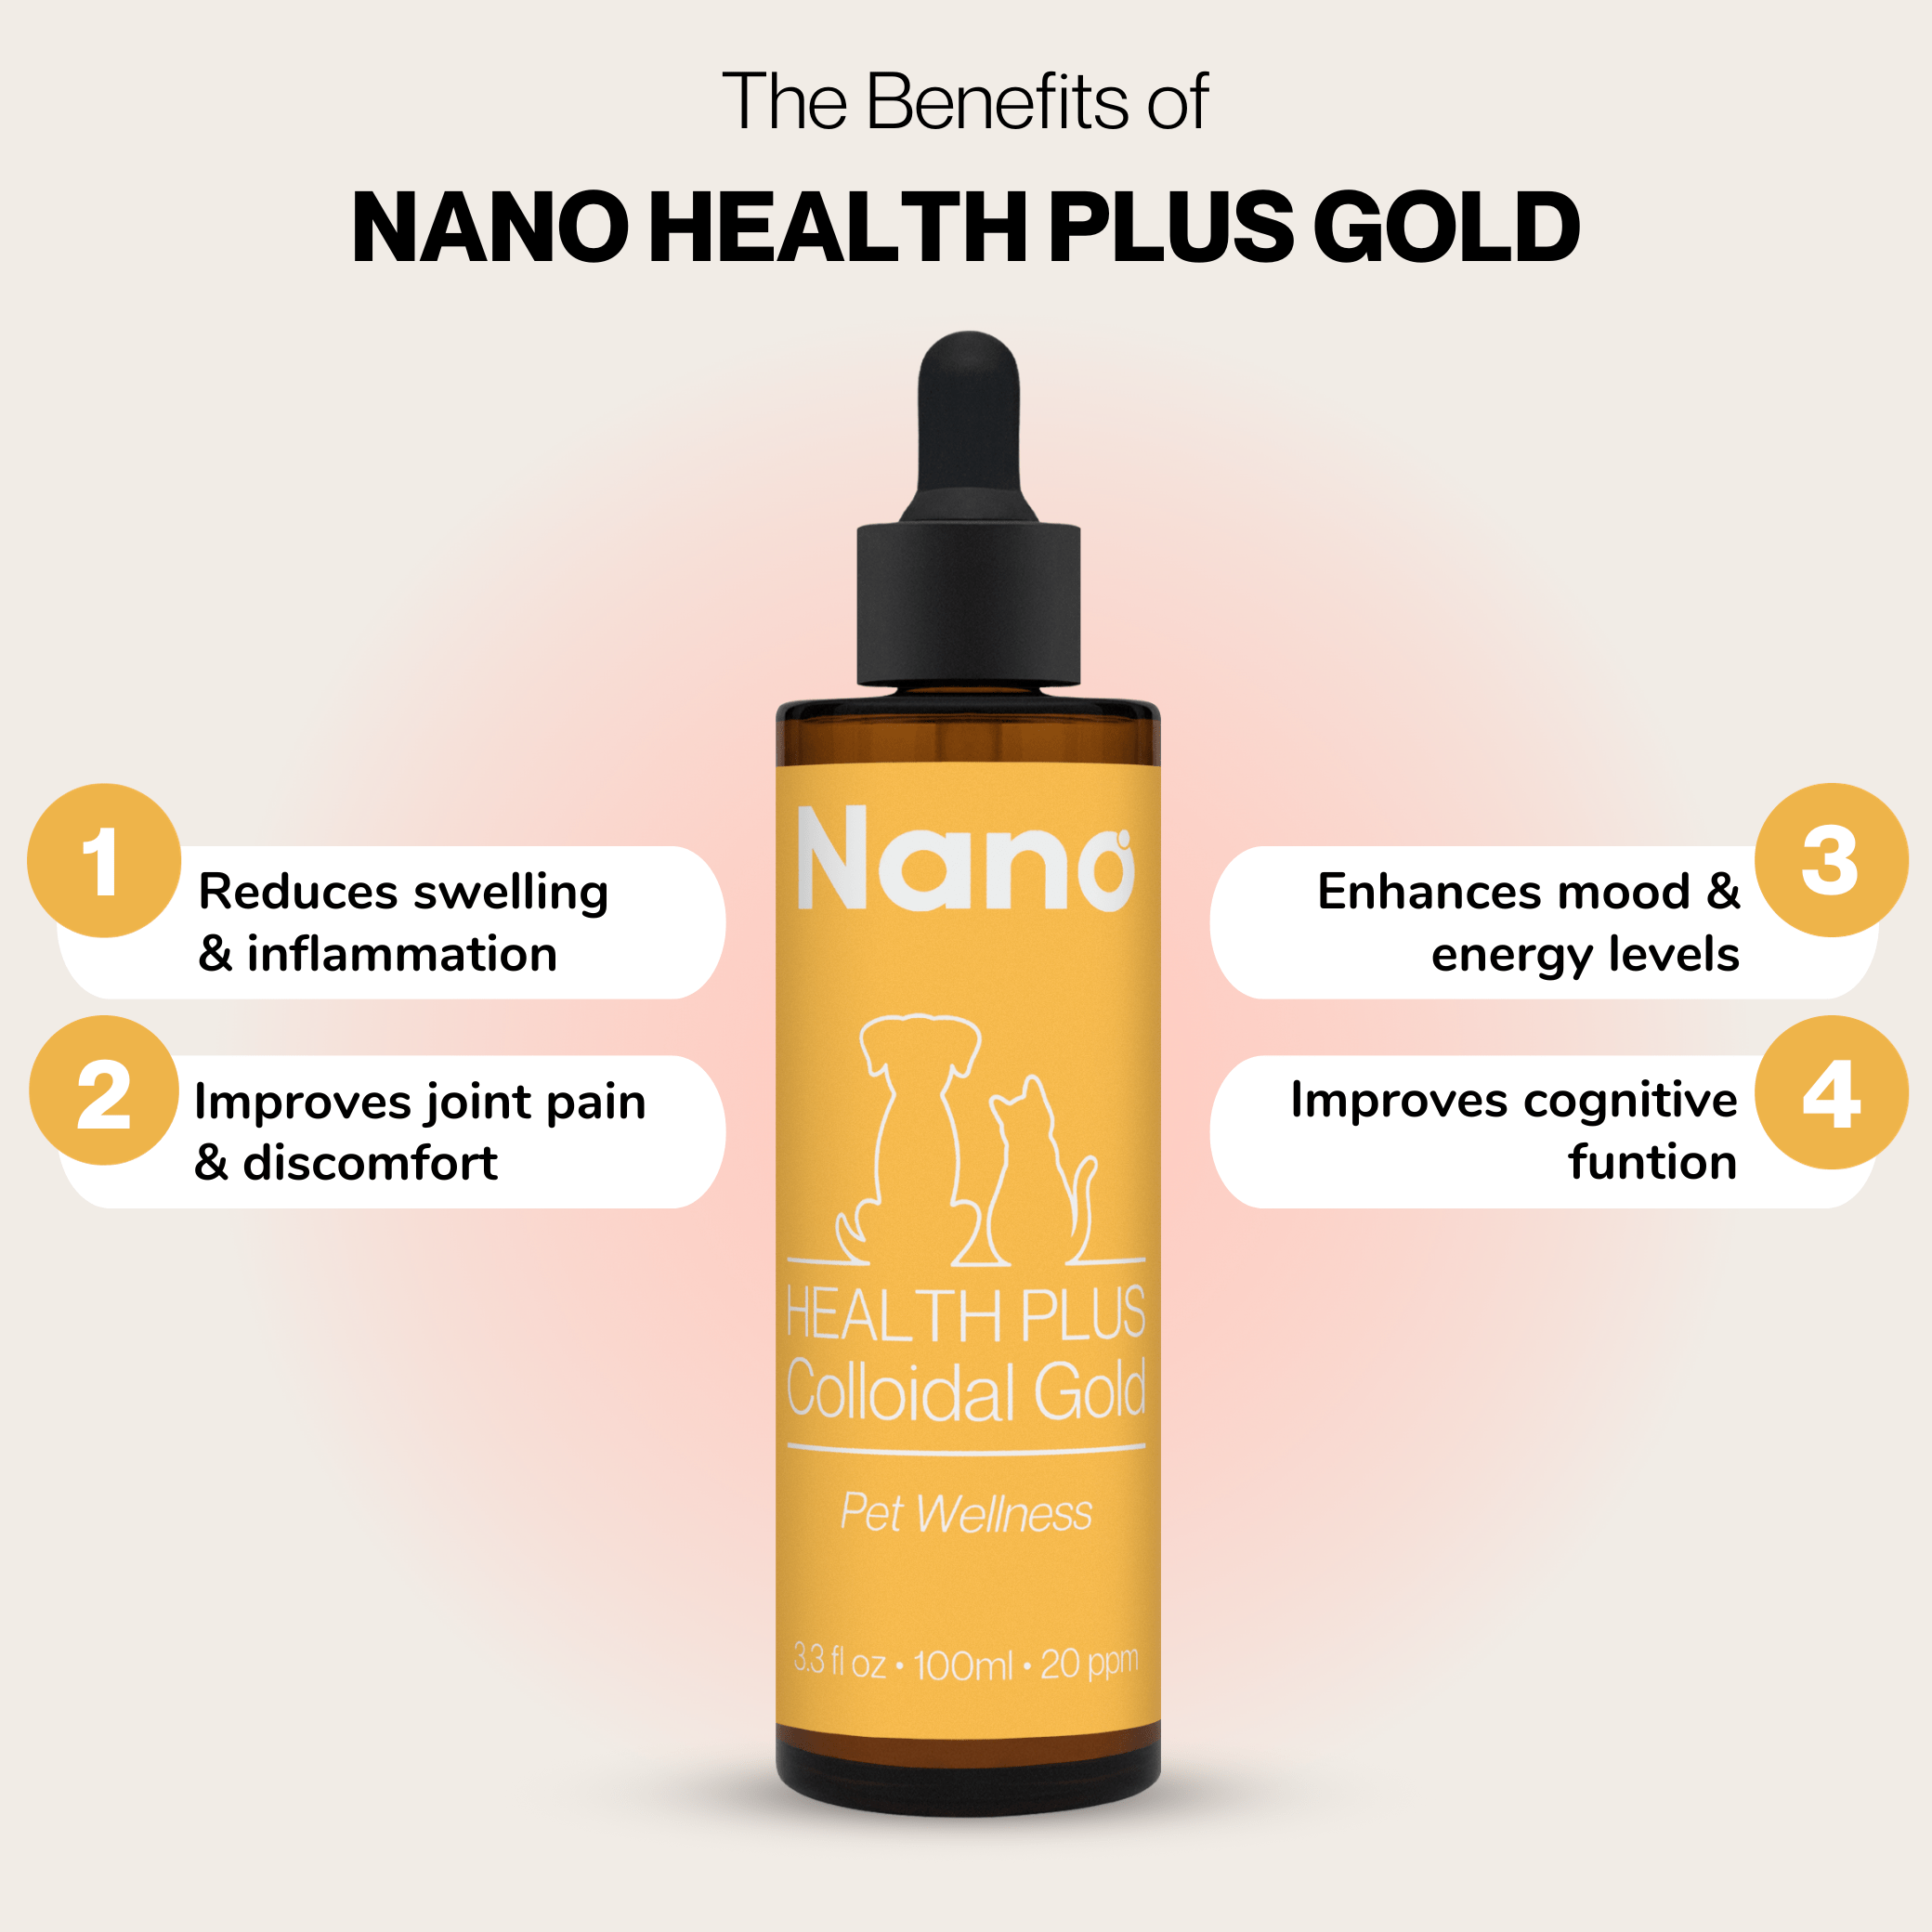 The benefits of Nano health plus colloidal gold pet wellness liquid health supplement. Reduces swelling and inflammation. Improves joint pain and discomfort. Enhances mood and energy levels. Improves cognitive function